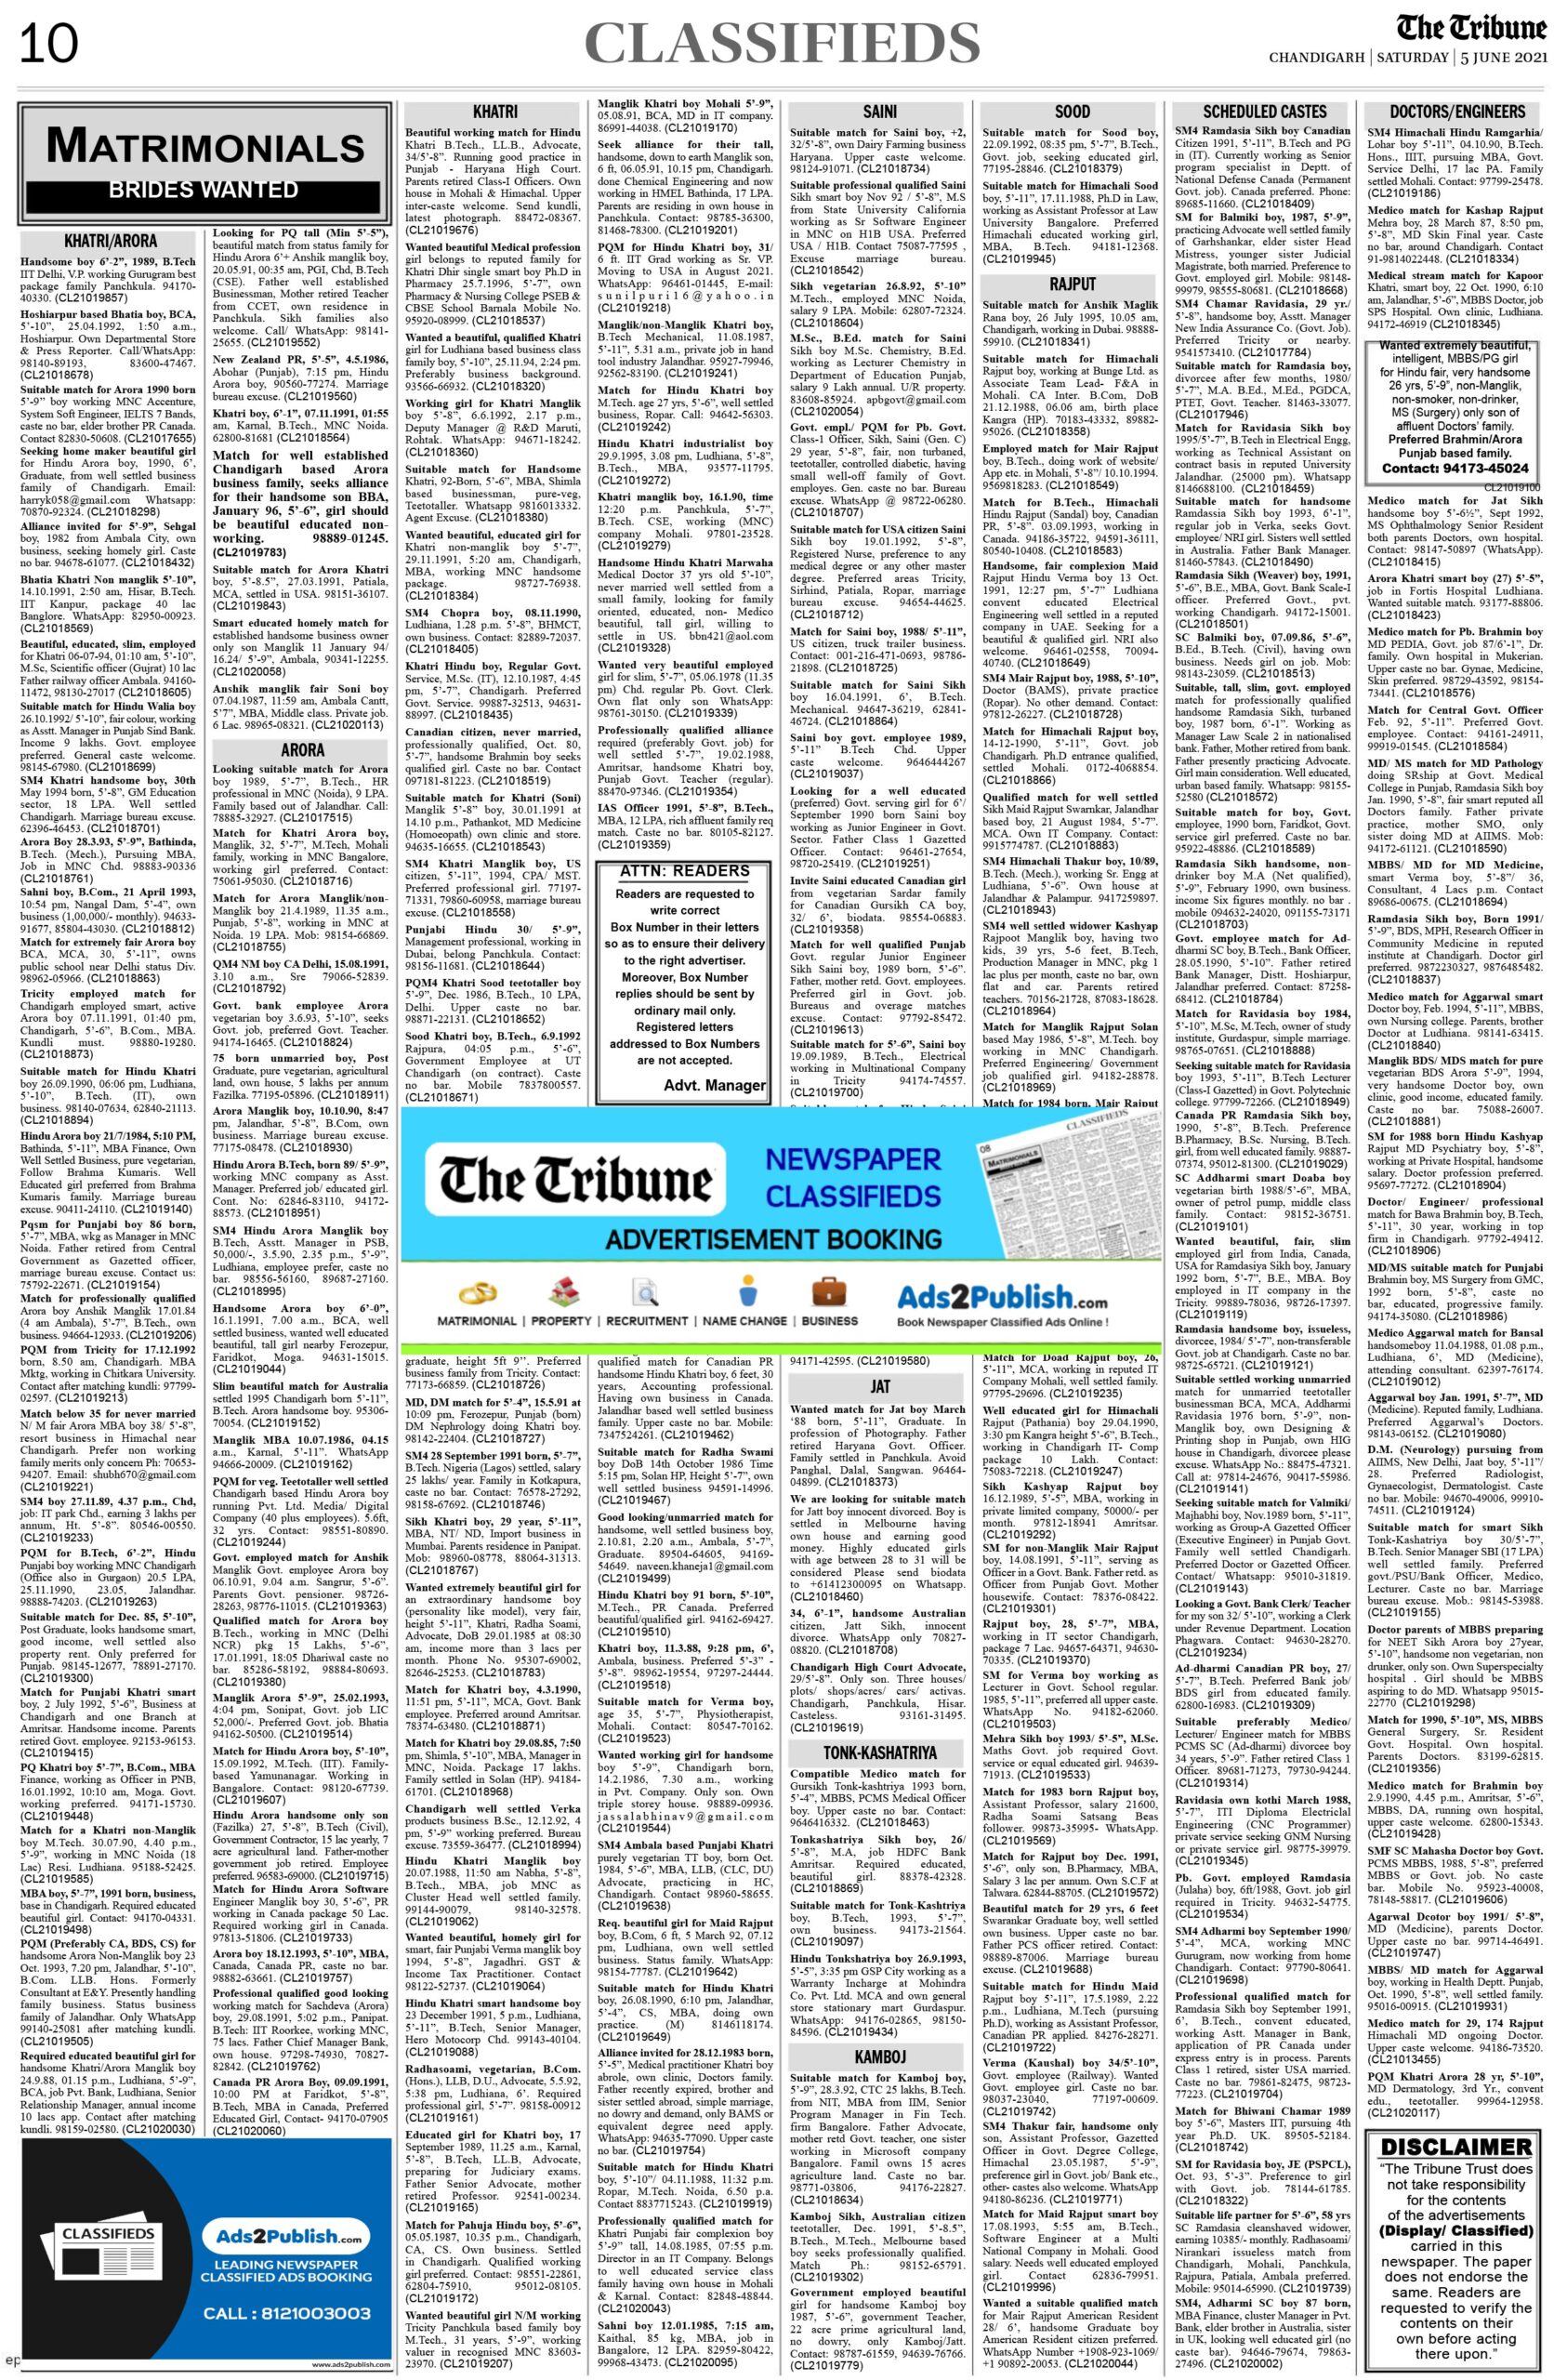 the-tribune-5-6-2021-matrimonial-wanted-bride-classified-paper